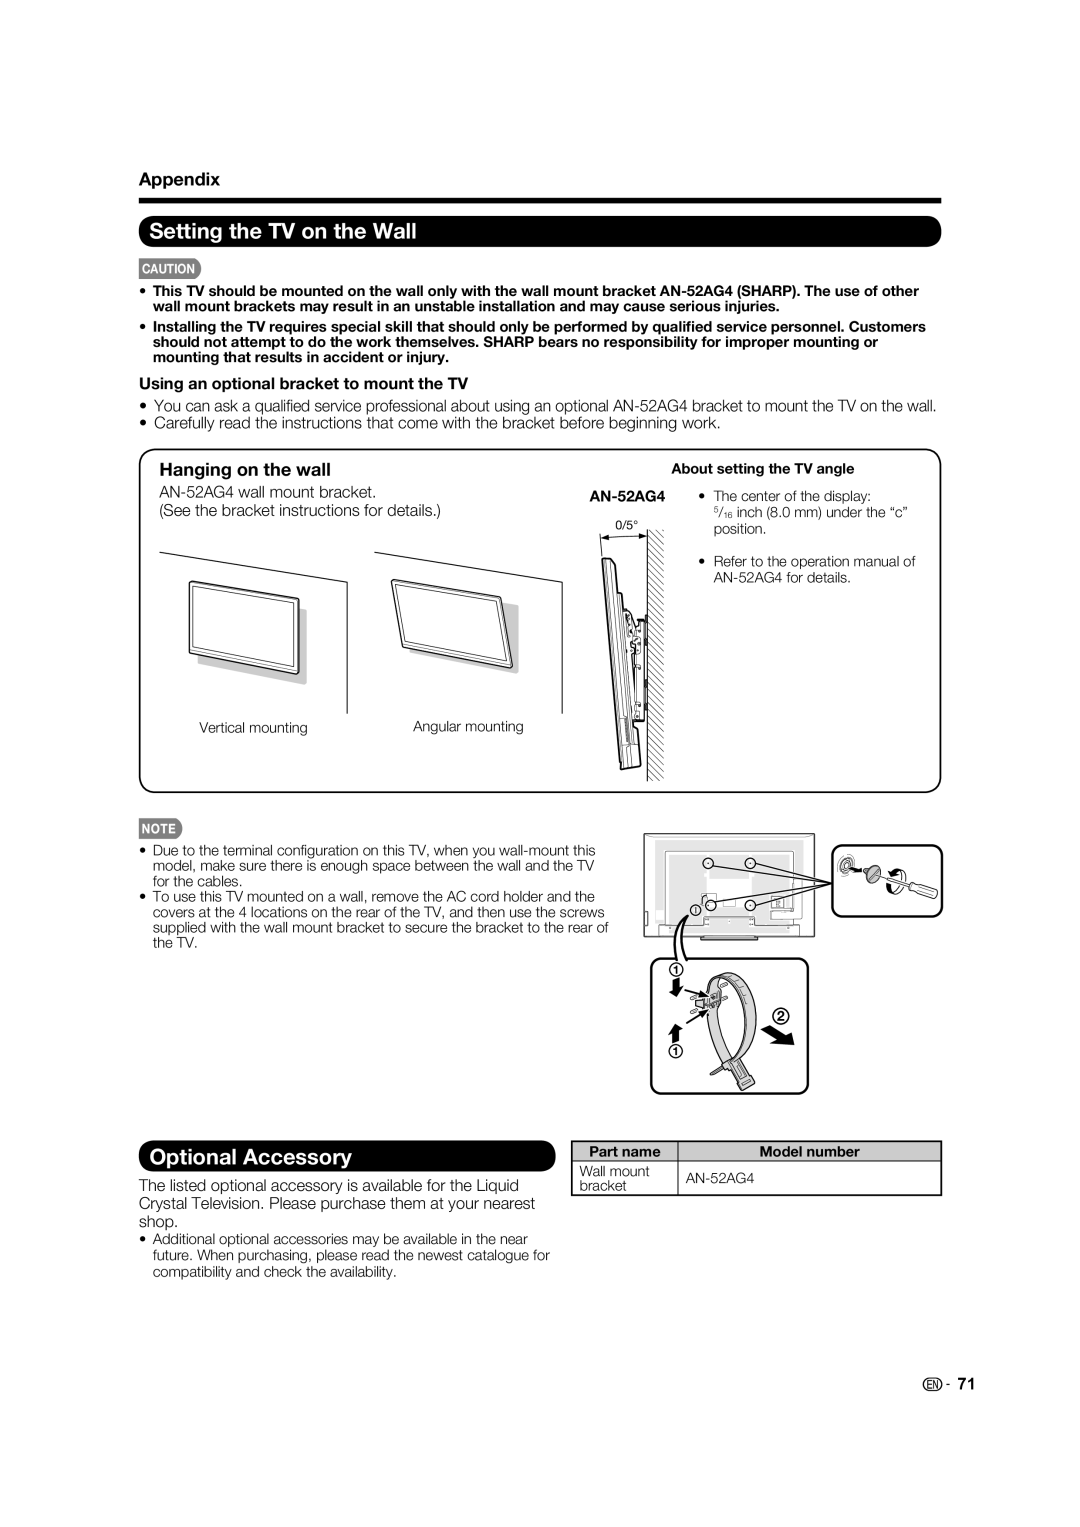 Sharp LC-70LE734U operation manual Setting the TV on the Wall, Optional Accessory, Appendix, Hanging on the wall 